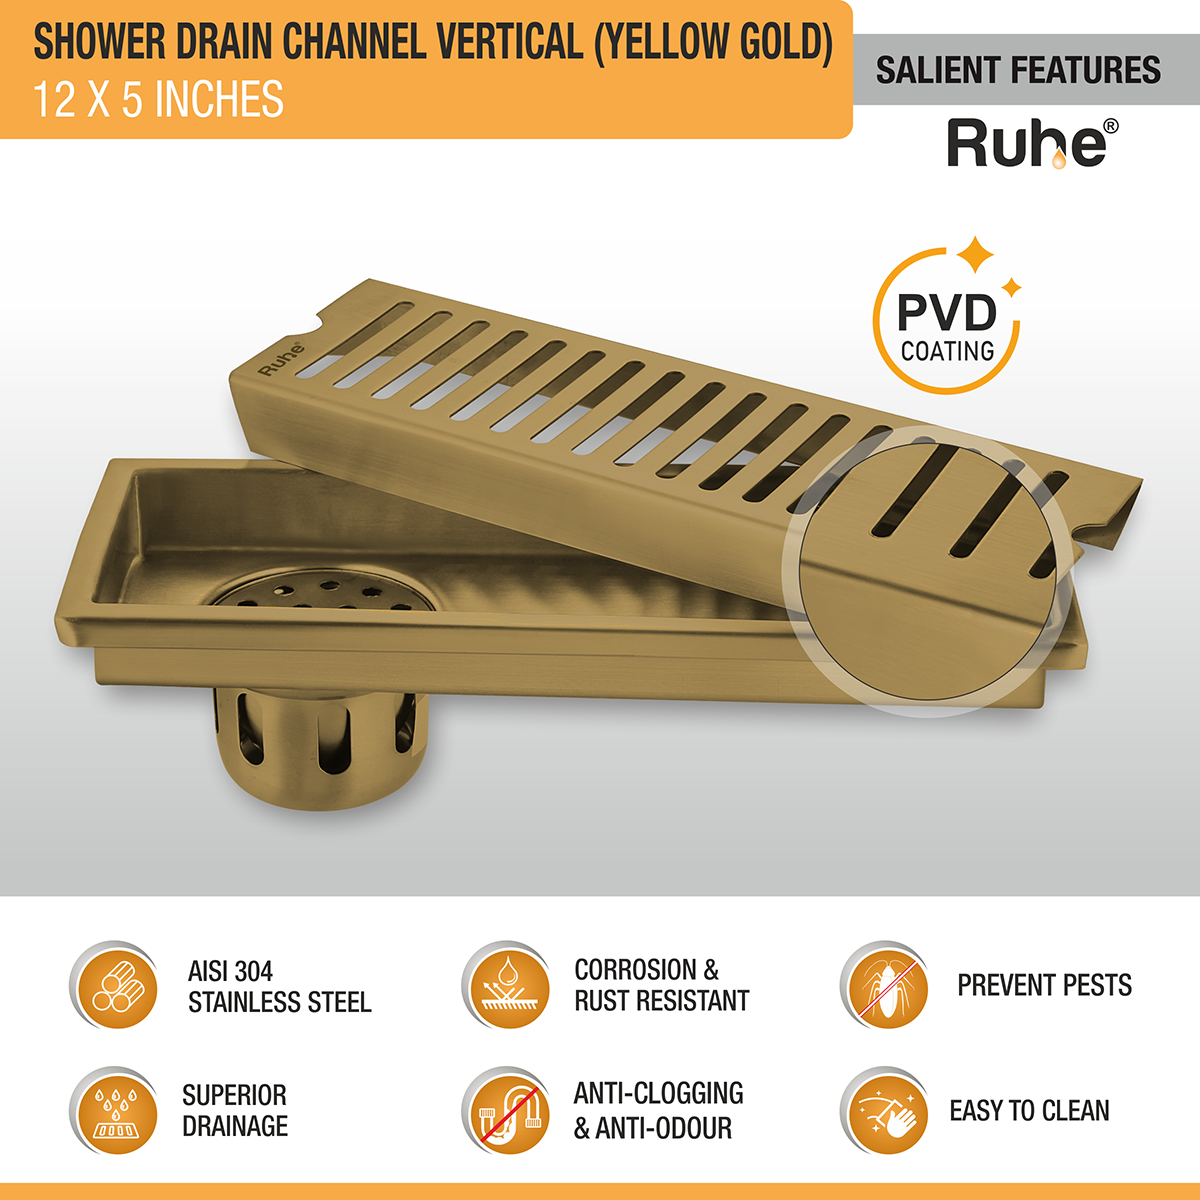 Vertical Shower Drain Channel (12 x 5 Inches) YELLOW GOLD features